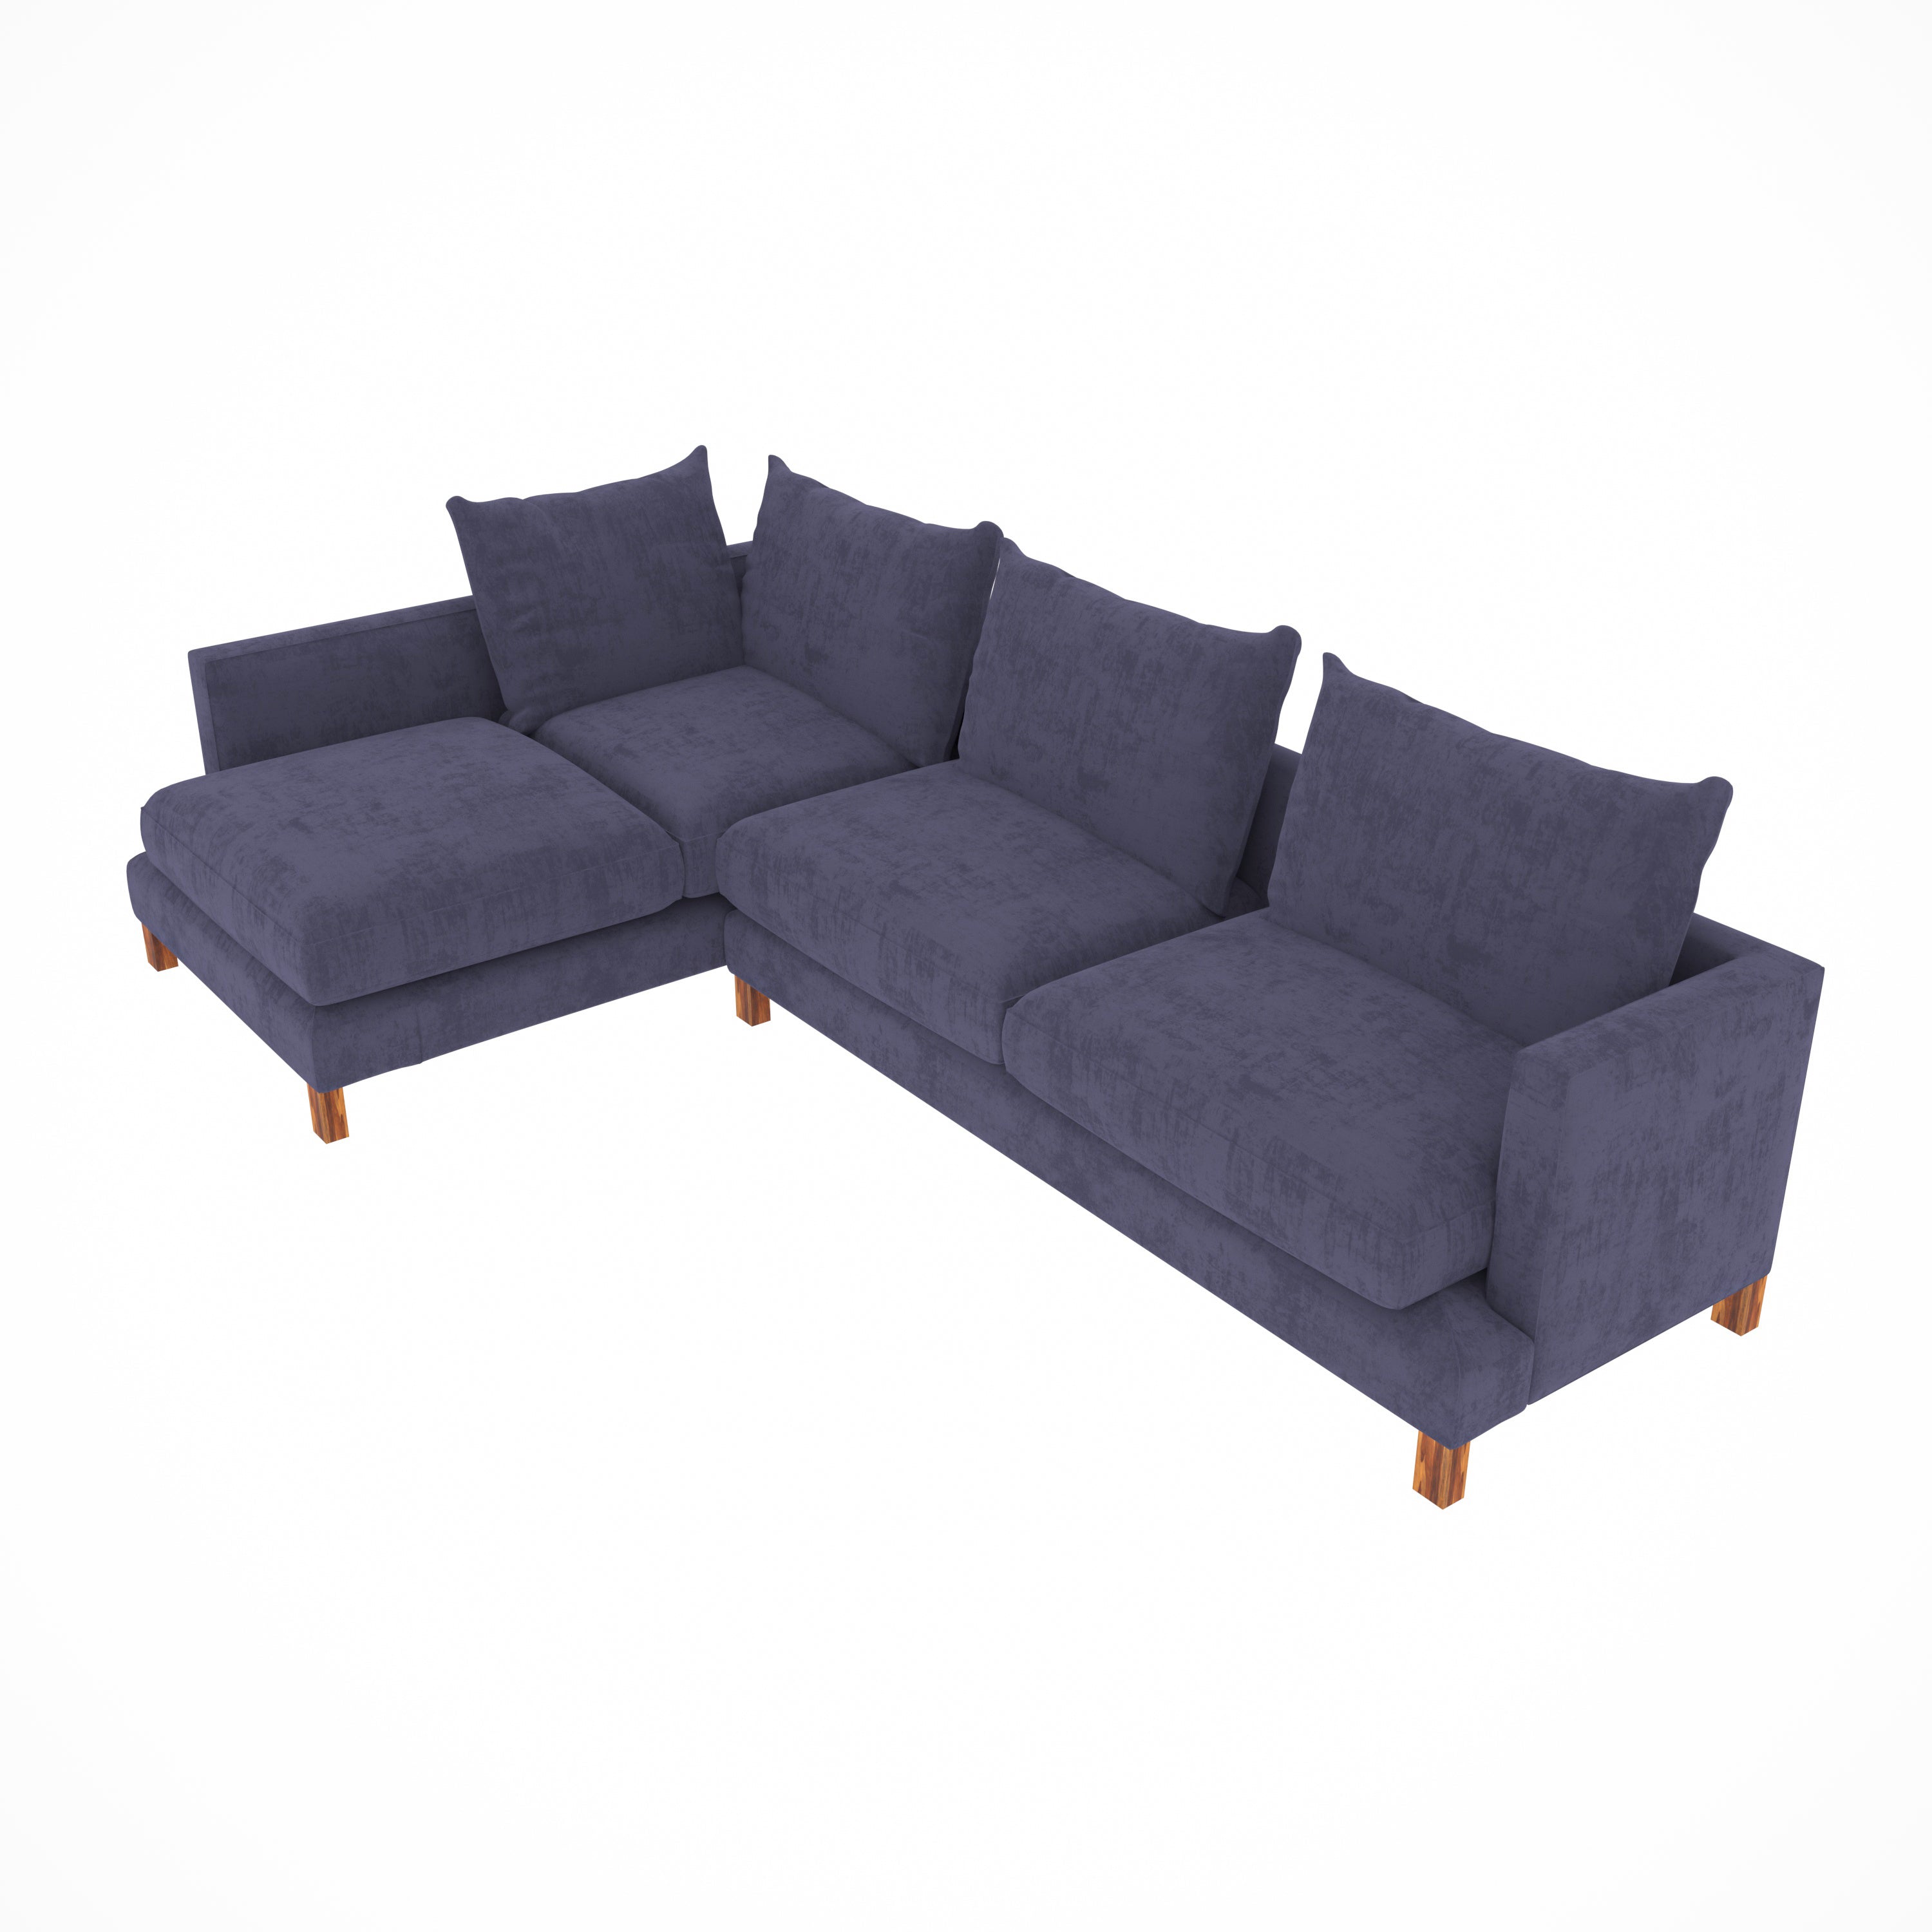 Voilet Purple Pastel Coloured with Premium Comfort L Shaped 4 Seater Sofa Set for Home Sofa